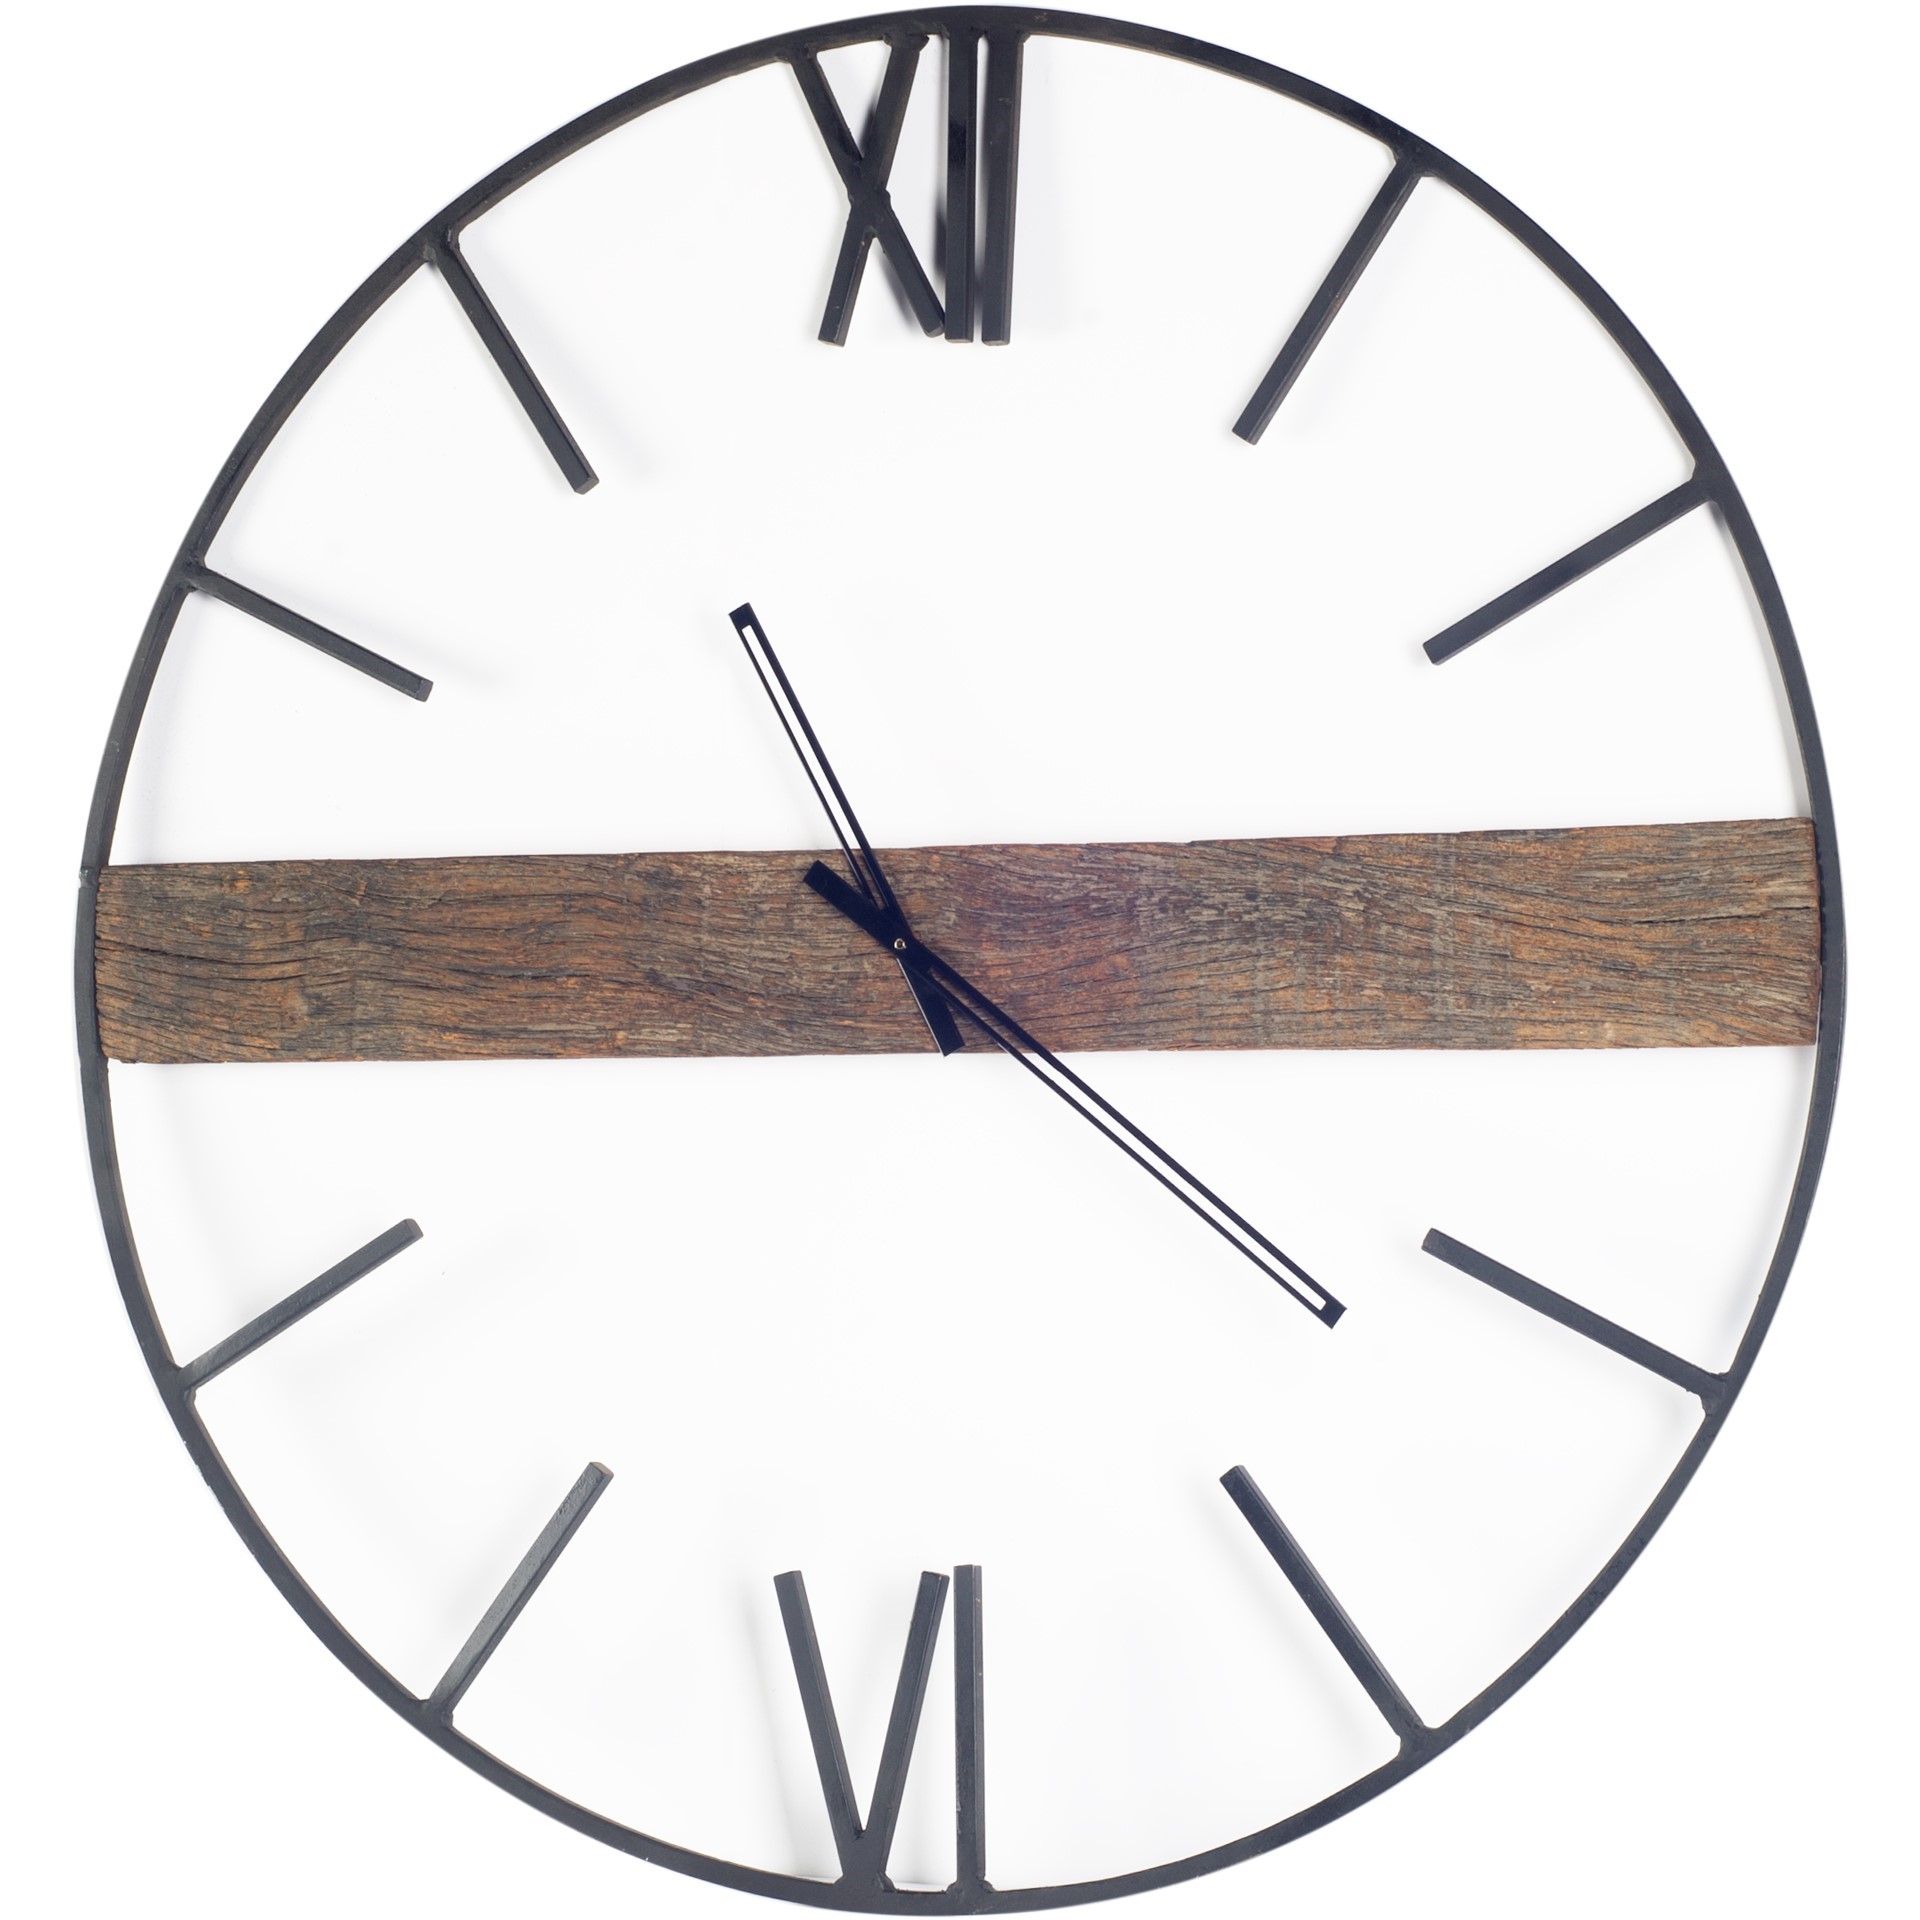 36" Round Oversize Industrial styleWall Clock w Roman Numerals at 6 and 12 o clock